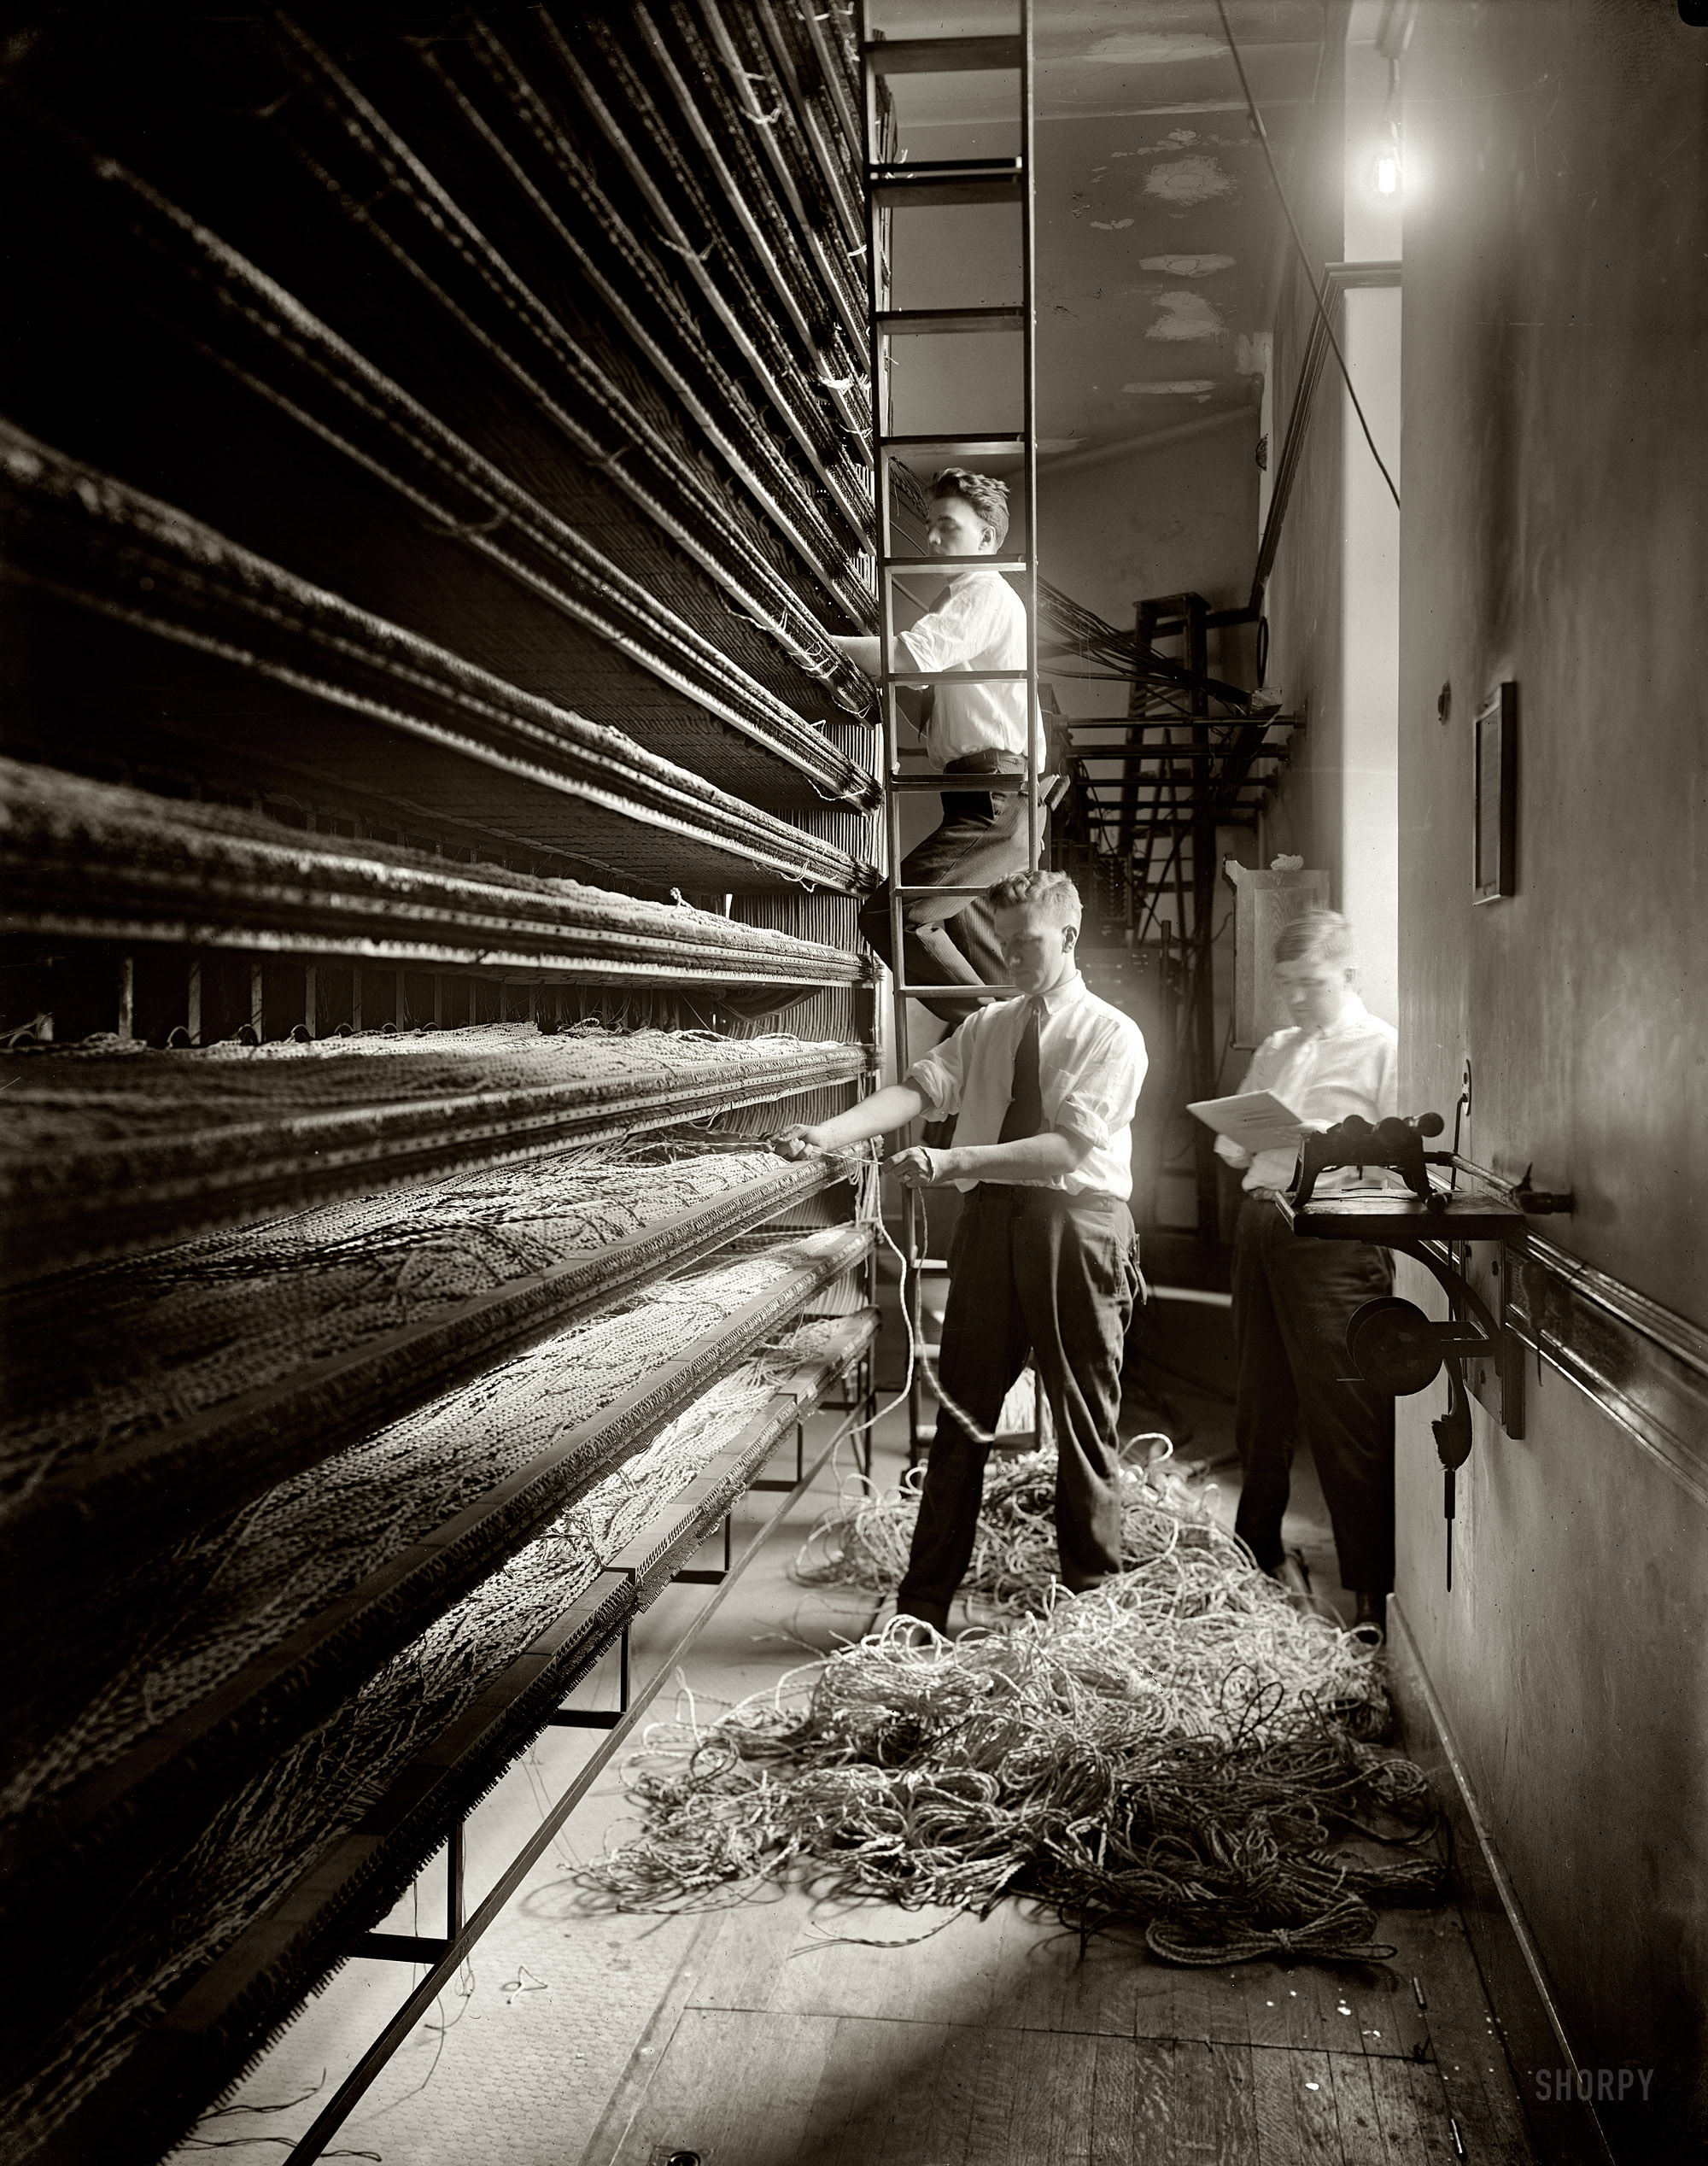 Washington, D.C., circa 1919. "Chesapeake & Potomac Telephone Co. wiring." A behind the scenes look at communications tech some 80 years after the telegraph tapped out its first message. Harris & Ewing glass negative. View full size.